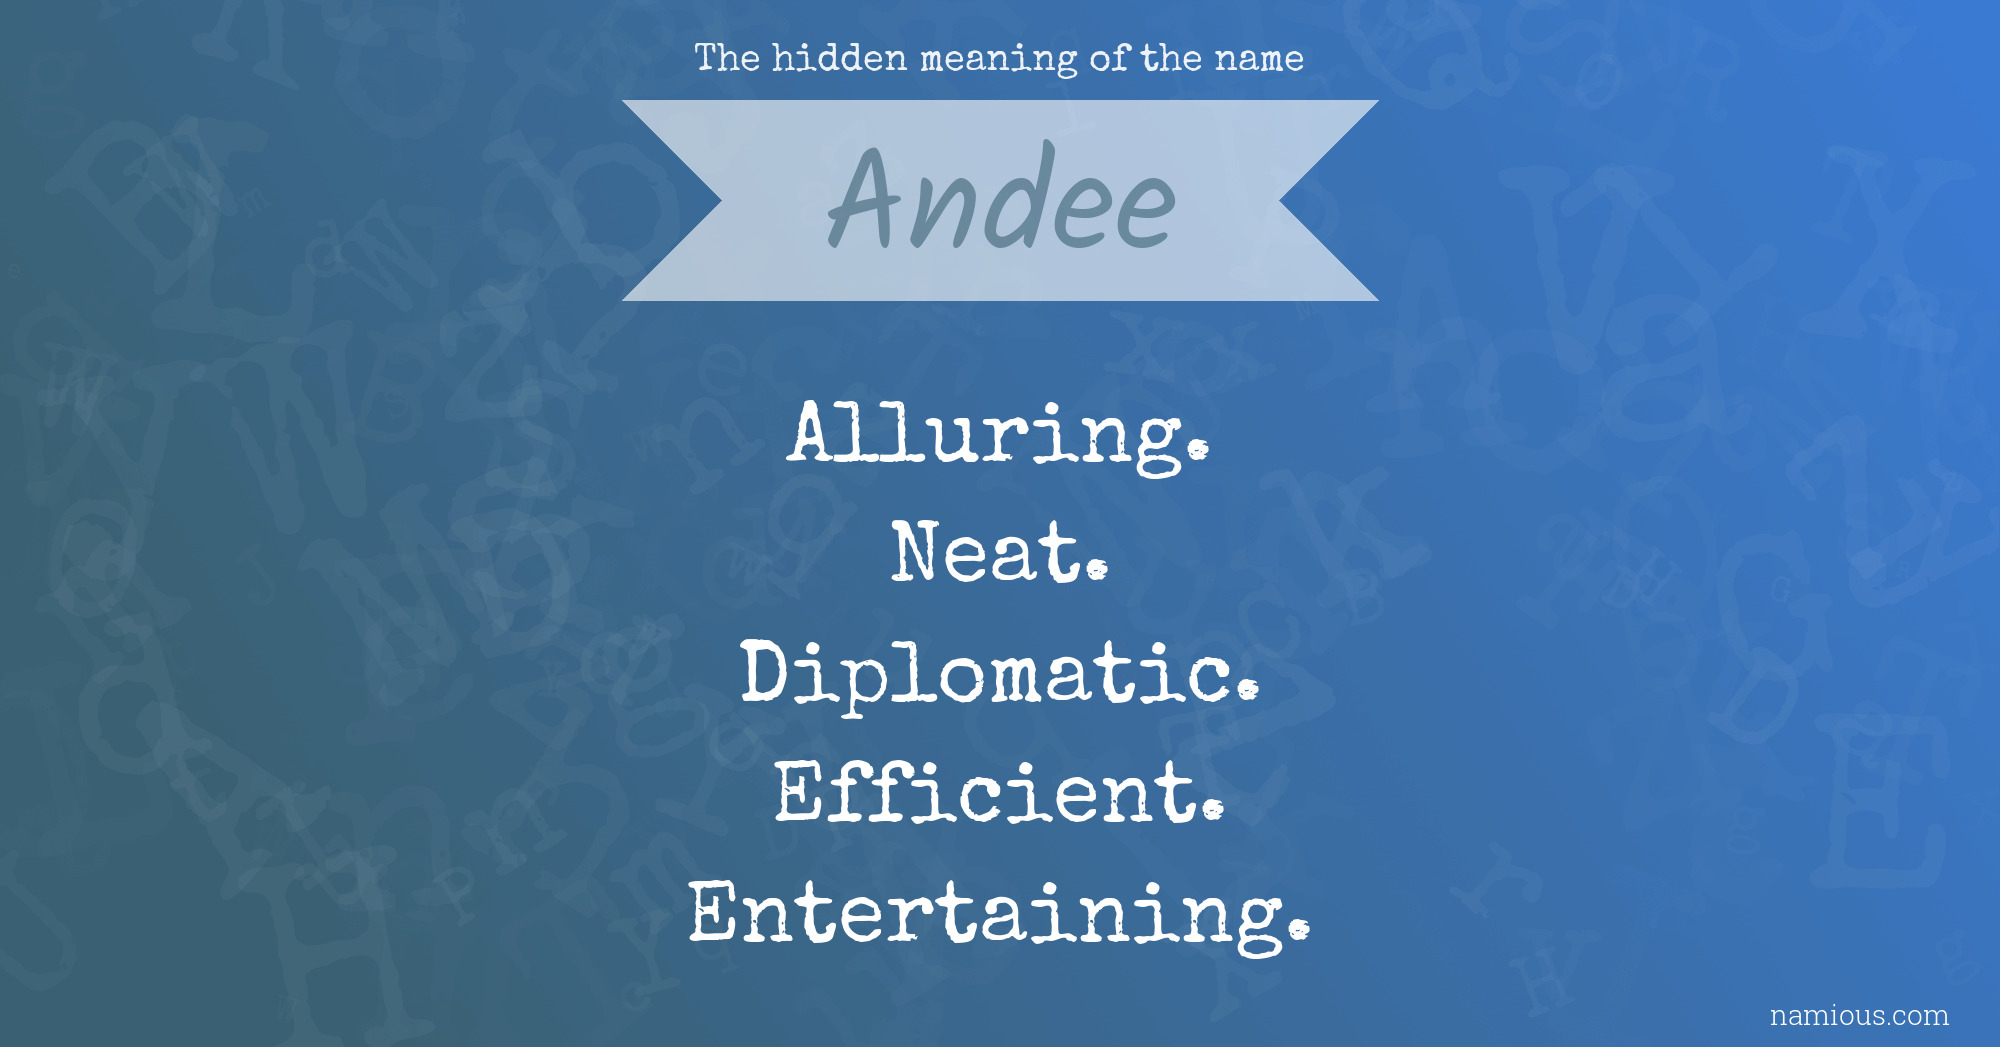 The hidden meaning of the name Andee